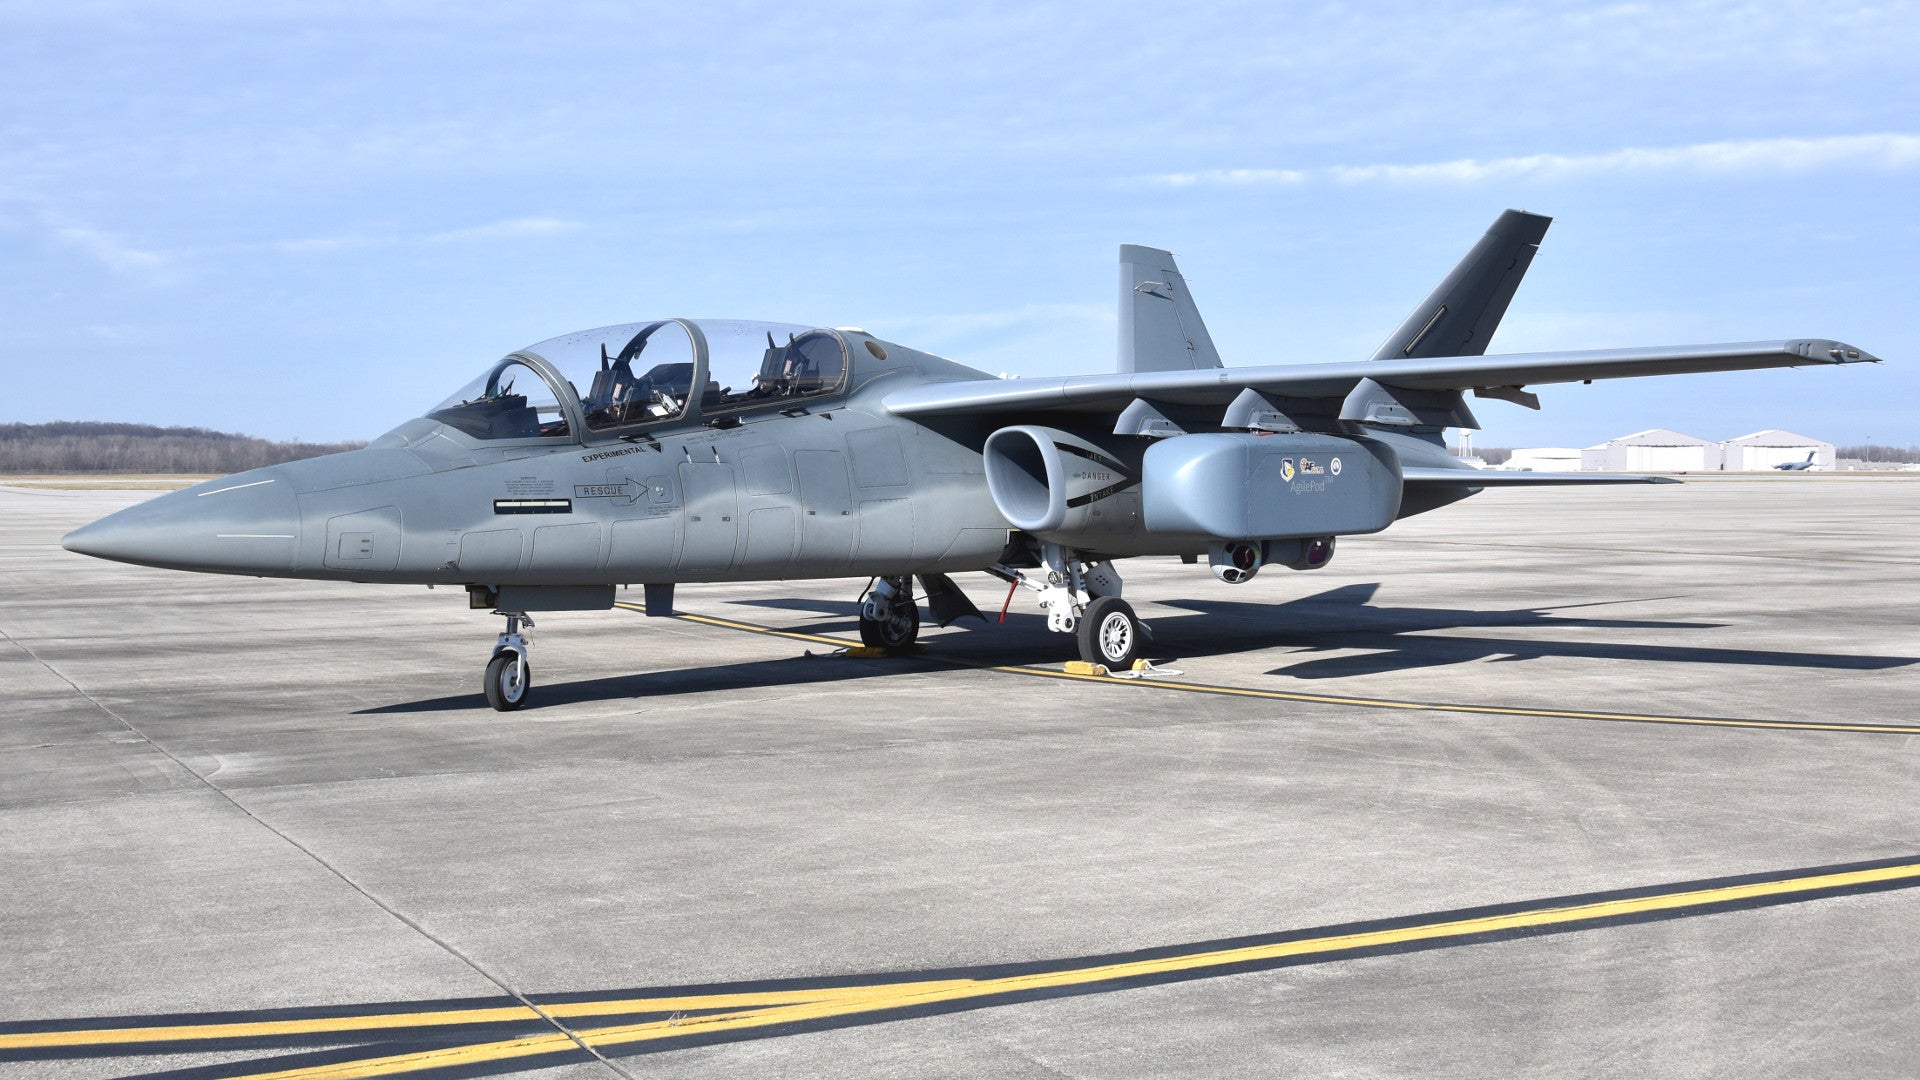 USAF Uses Textron’s Scorpion Jet As the Latest Testbed for Its Modular Sensor Pod